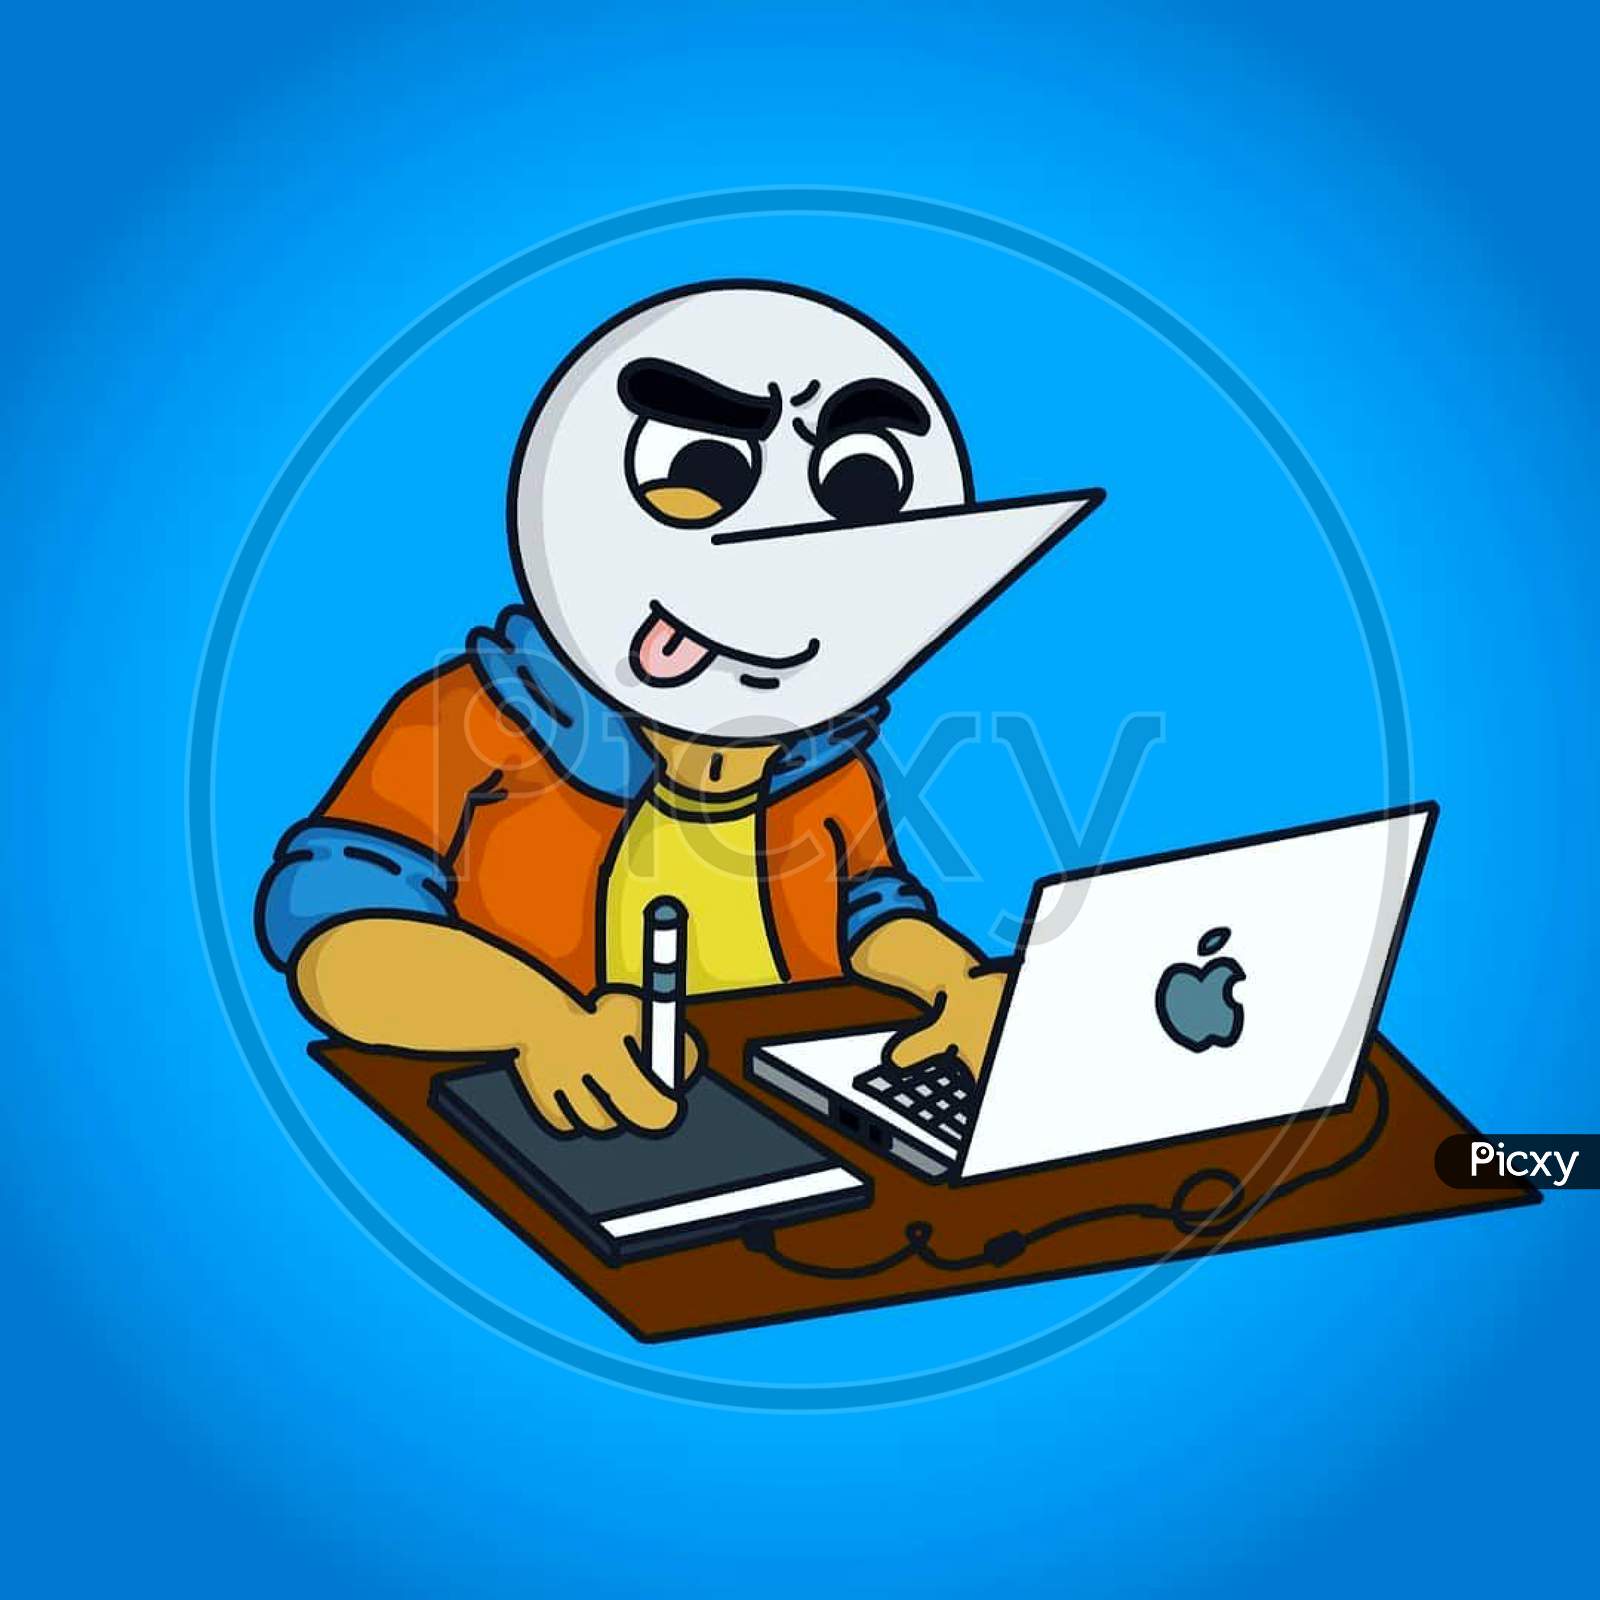 The Angry Prash illustration doing graphic designing